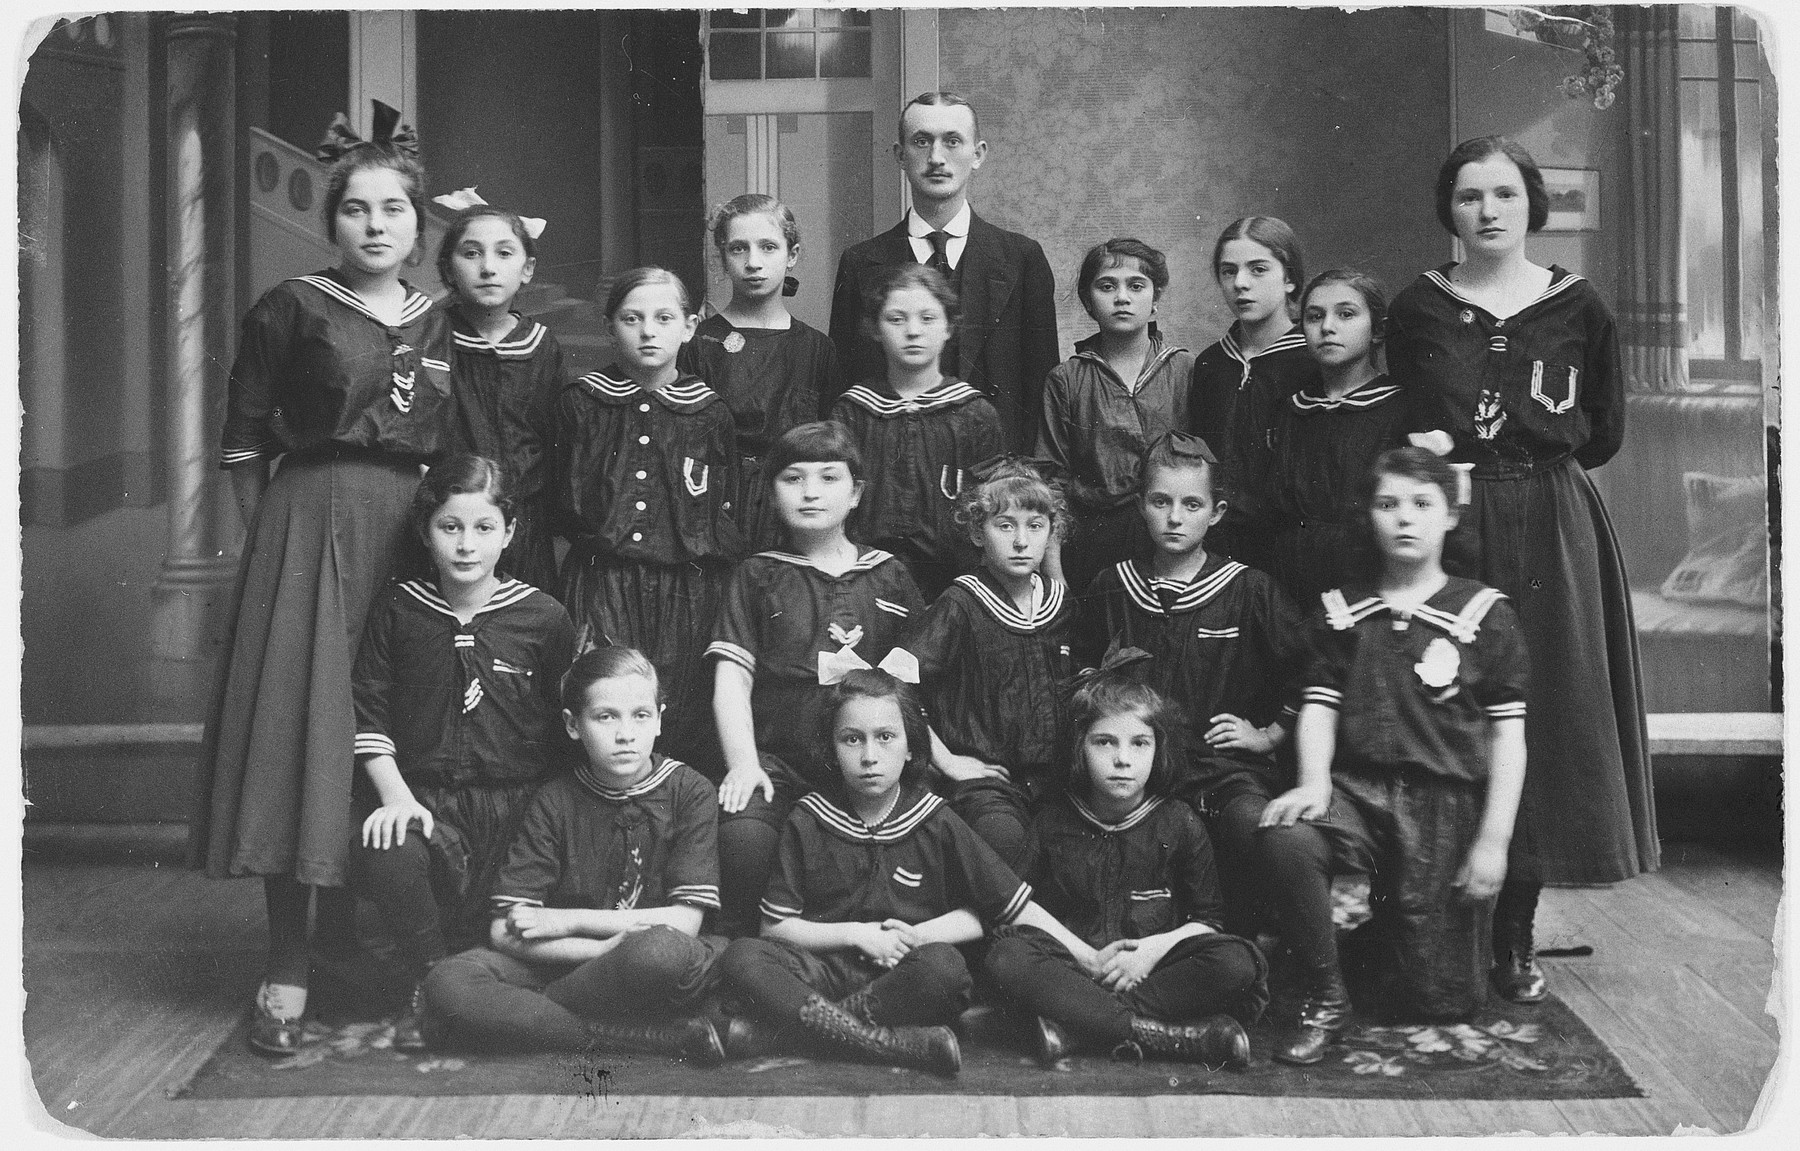 Polish and Jewish girls in a gymnasium in Wloclawek.

Among those pictured is Henia Dyszel.